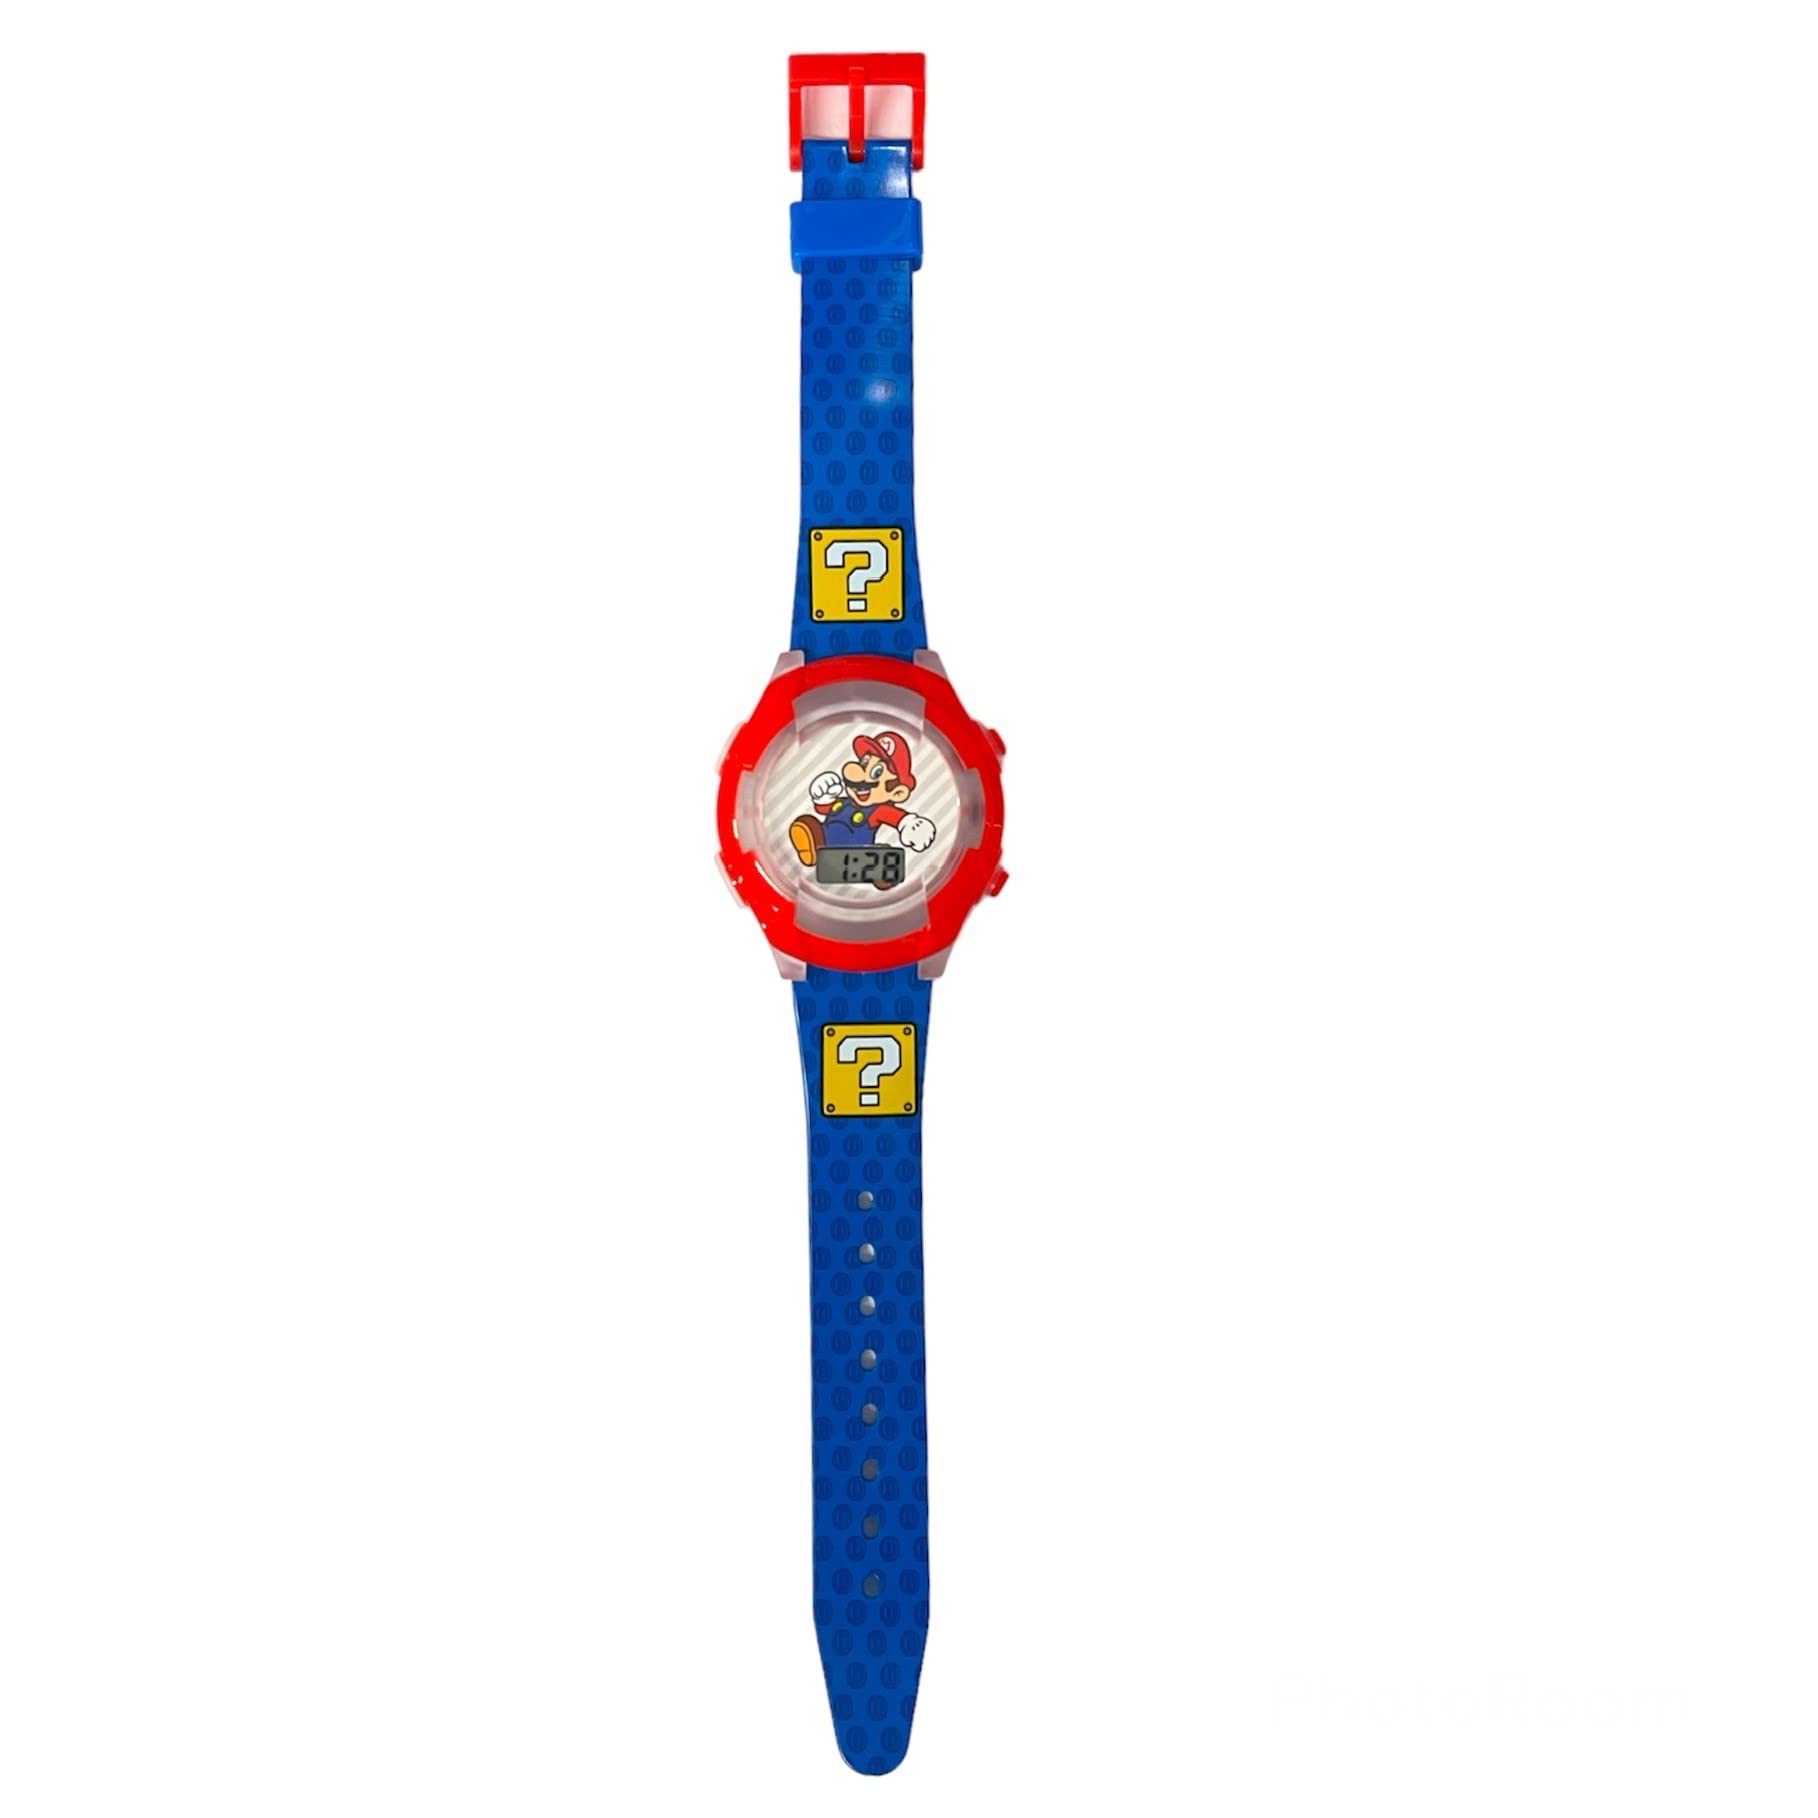 Accutime Kids Nintendo Super Mario Digital Flashing LCD Quartz Childrens Wrist Watch for Boys, Girls, Toddlers with Red and Blue Multicolor Strap (Model: GSM4198AZ)